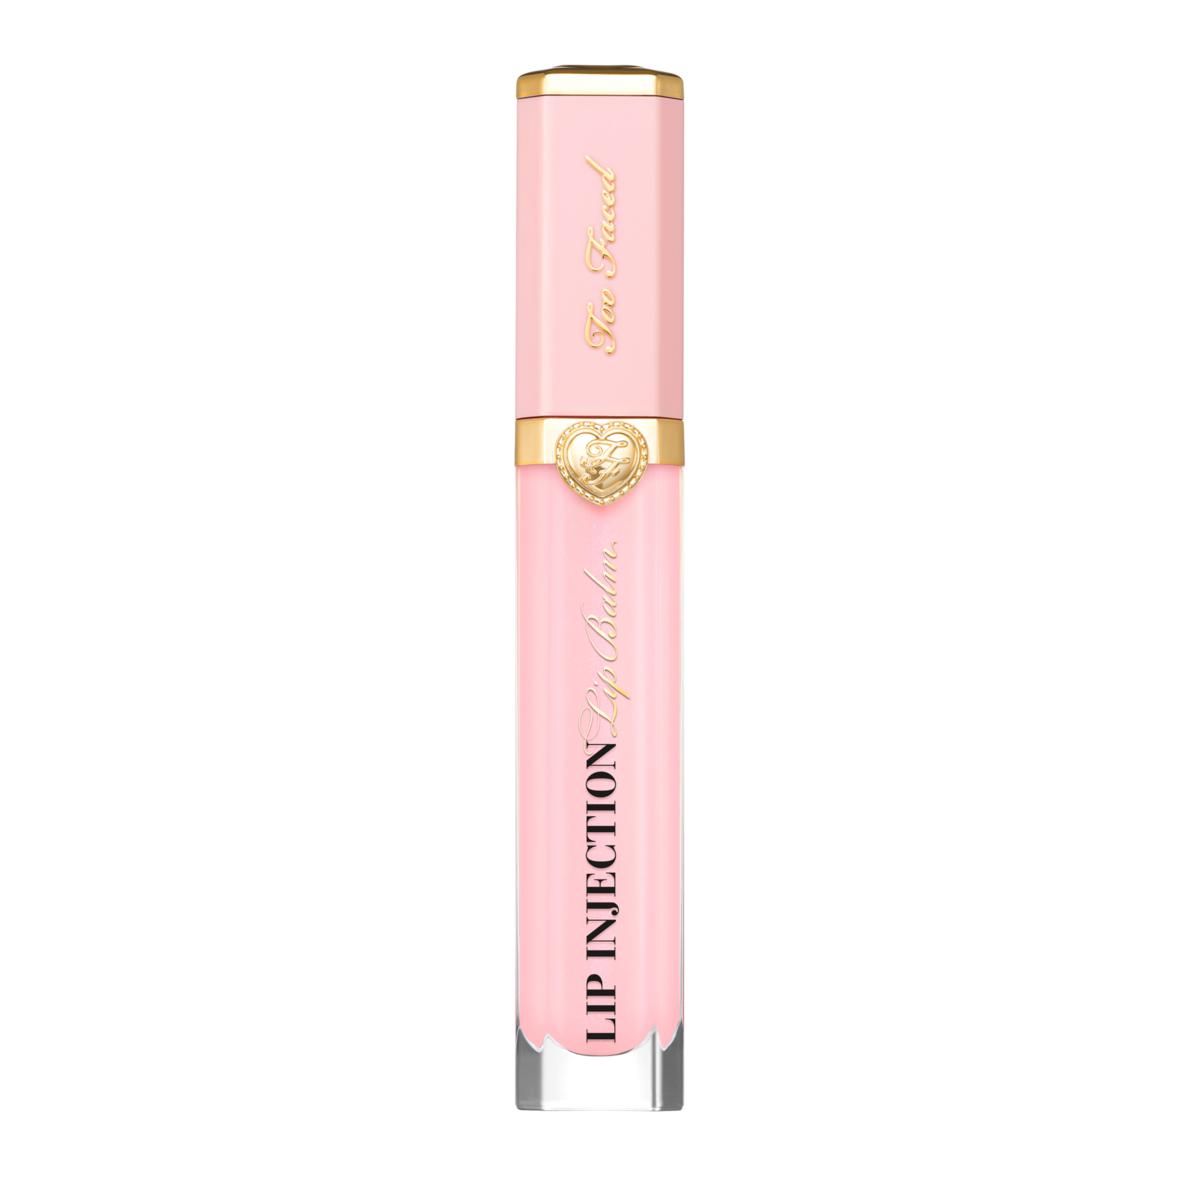 Too Faced Lip Injection Power Plumping Liquid Lip Balm | HSN